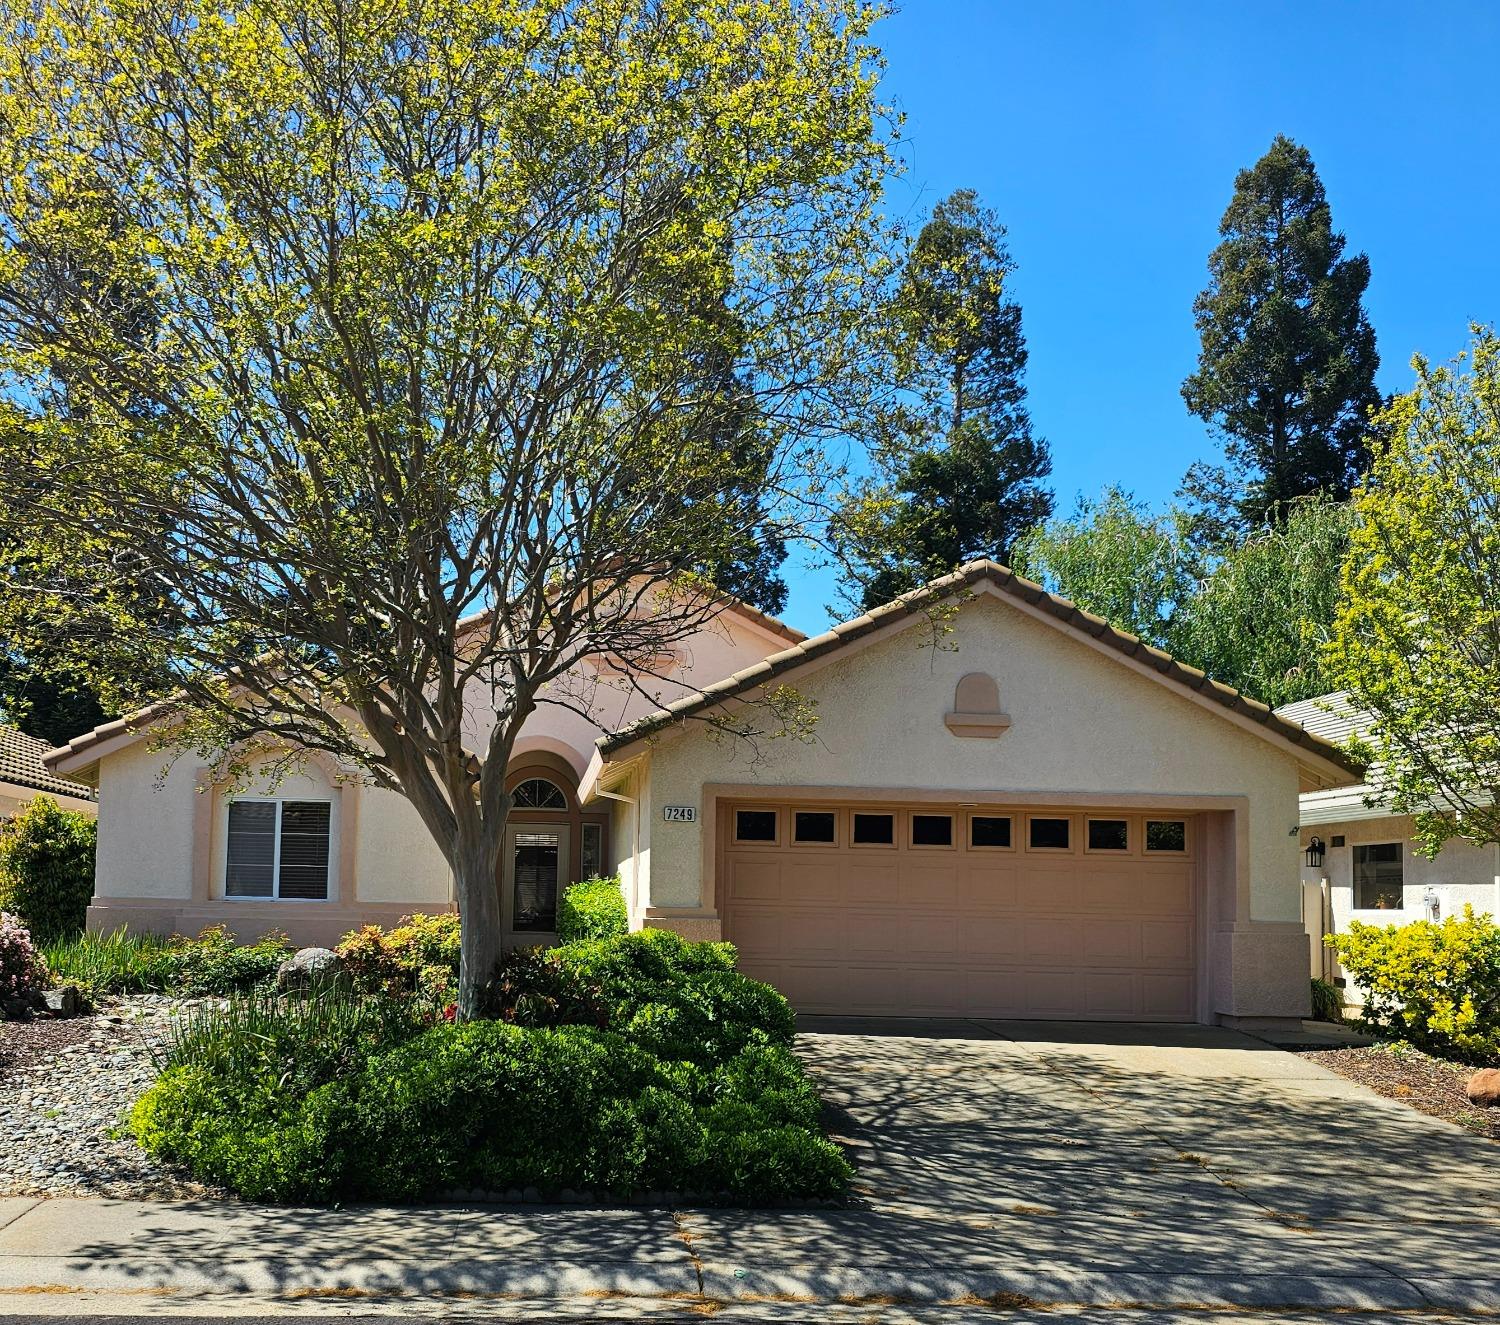 Photo of 7249 Shadylane Wy in Roseville, CA